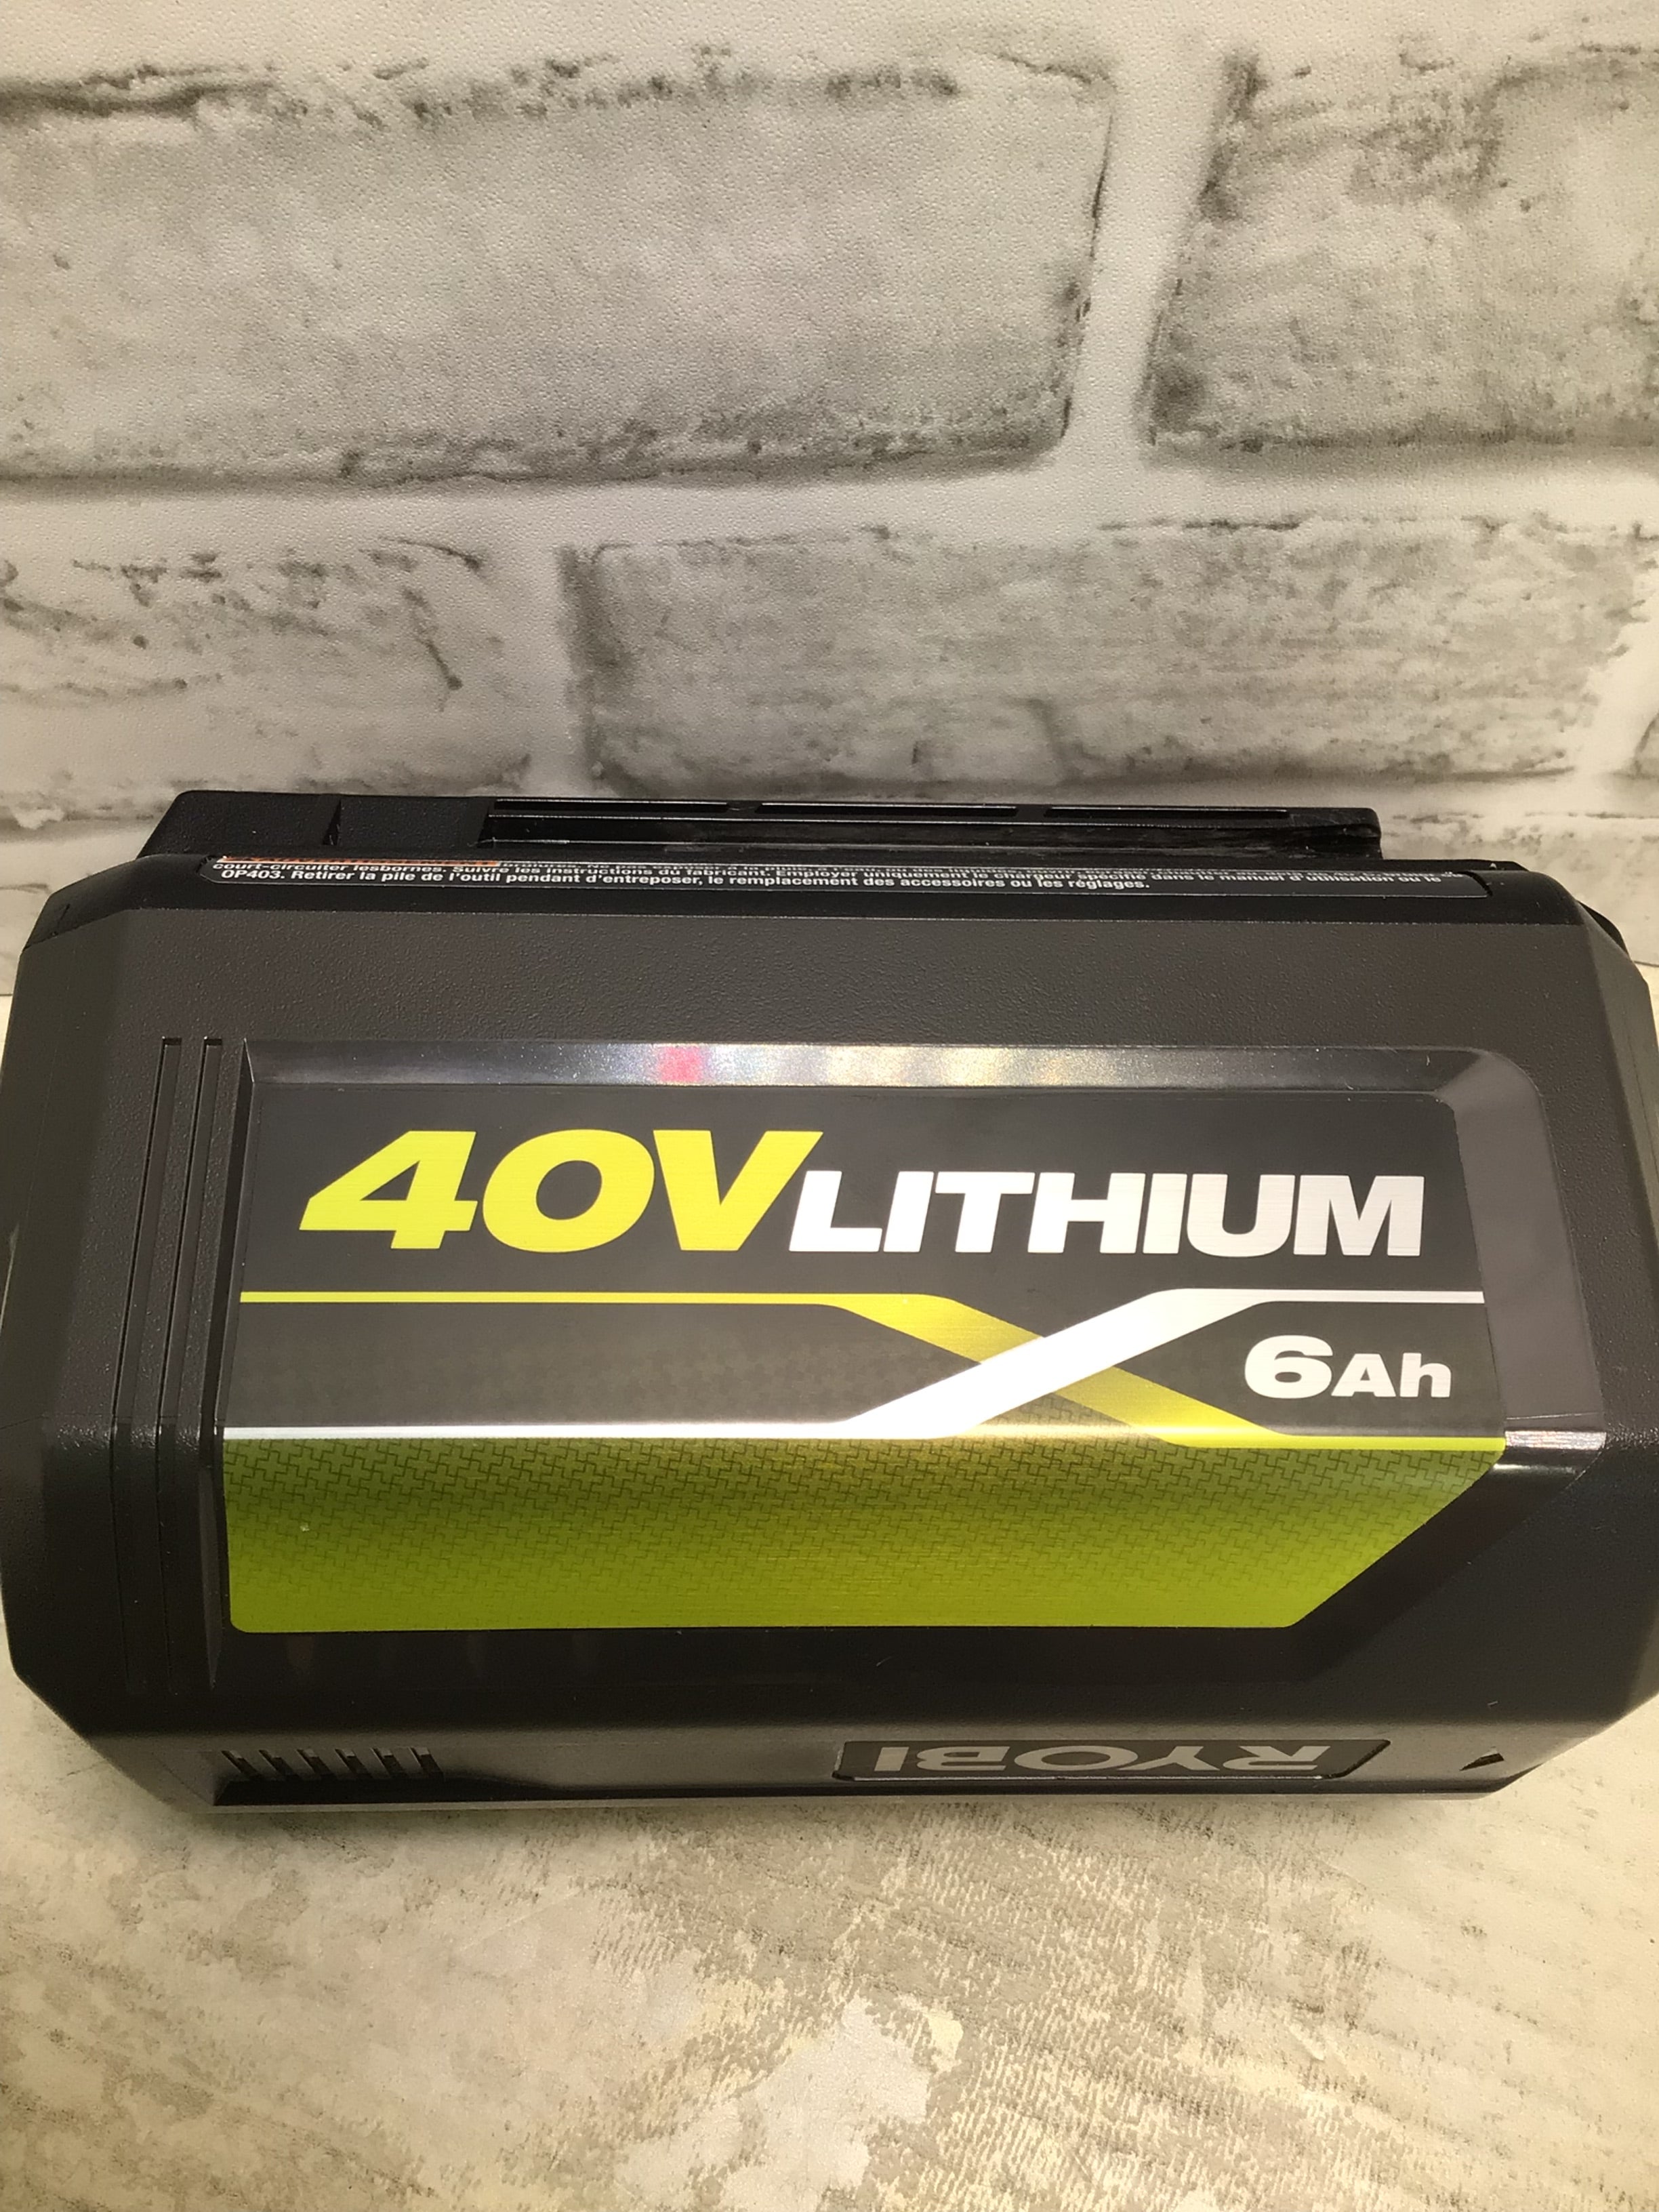 Ryobi OP40602VNM 40v 6Ah Lithium Battery And Charger (7752996356334)